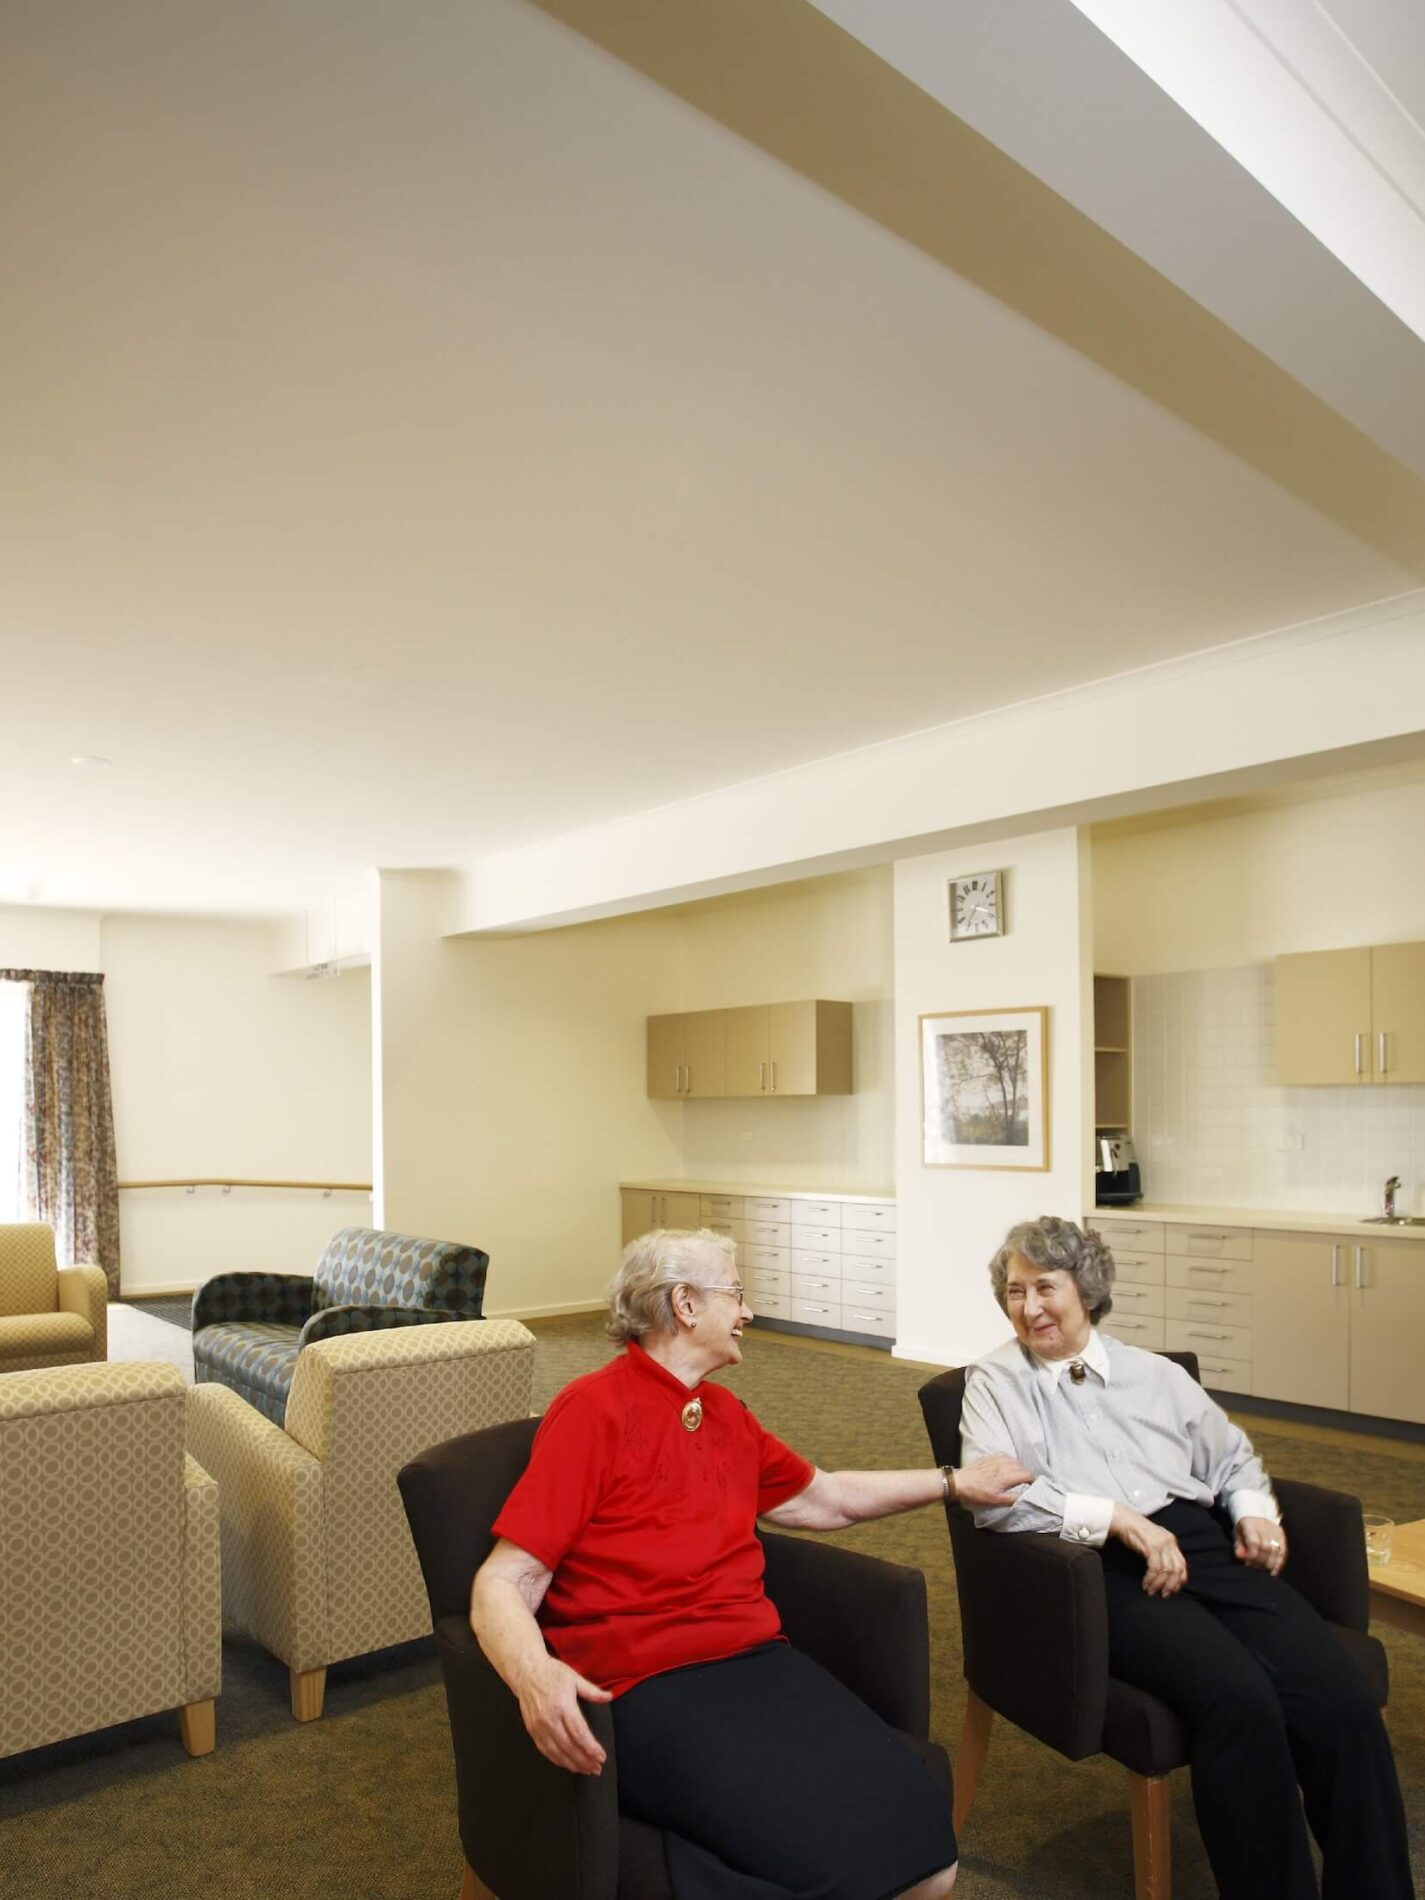 Two older women laugh and chat in armchairs in living space with kitchenette beyond